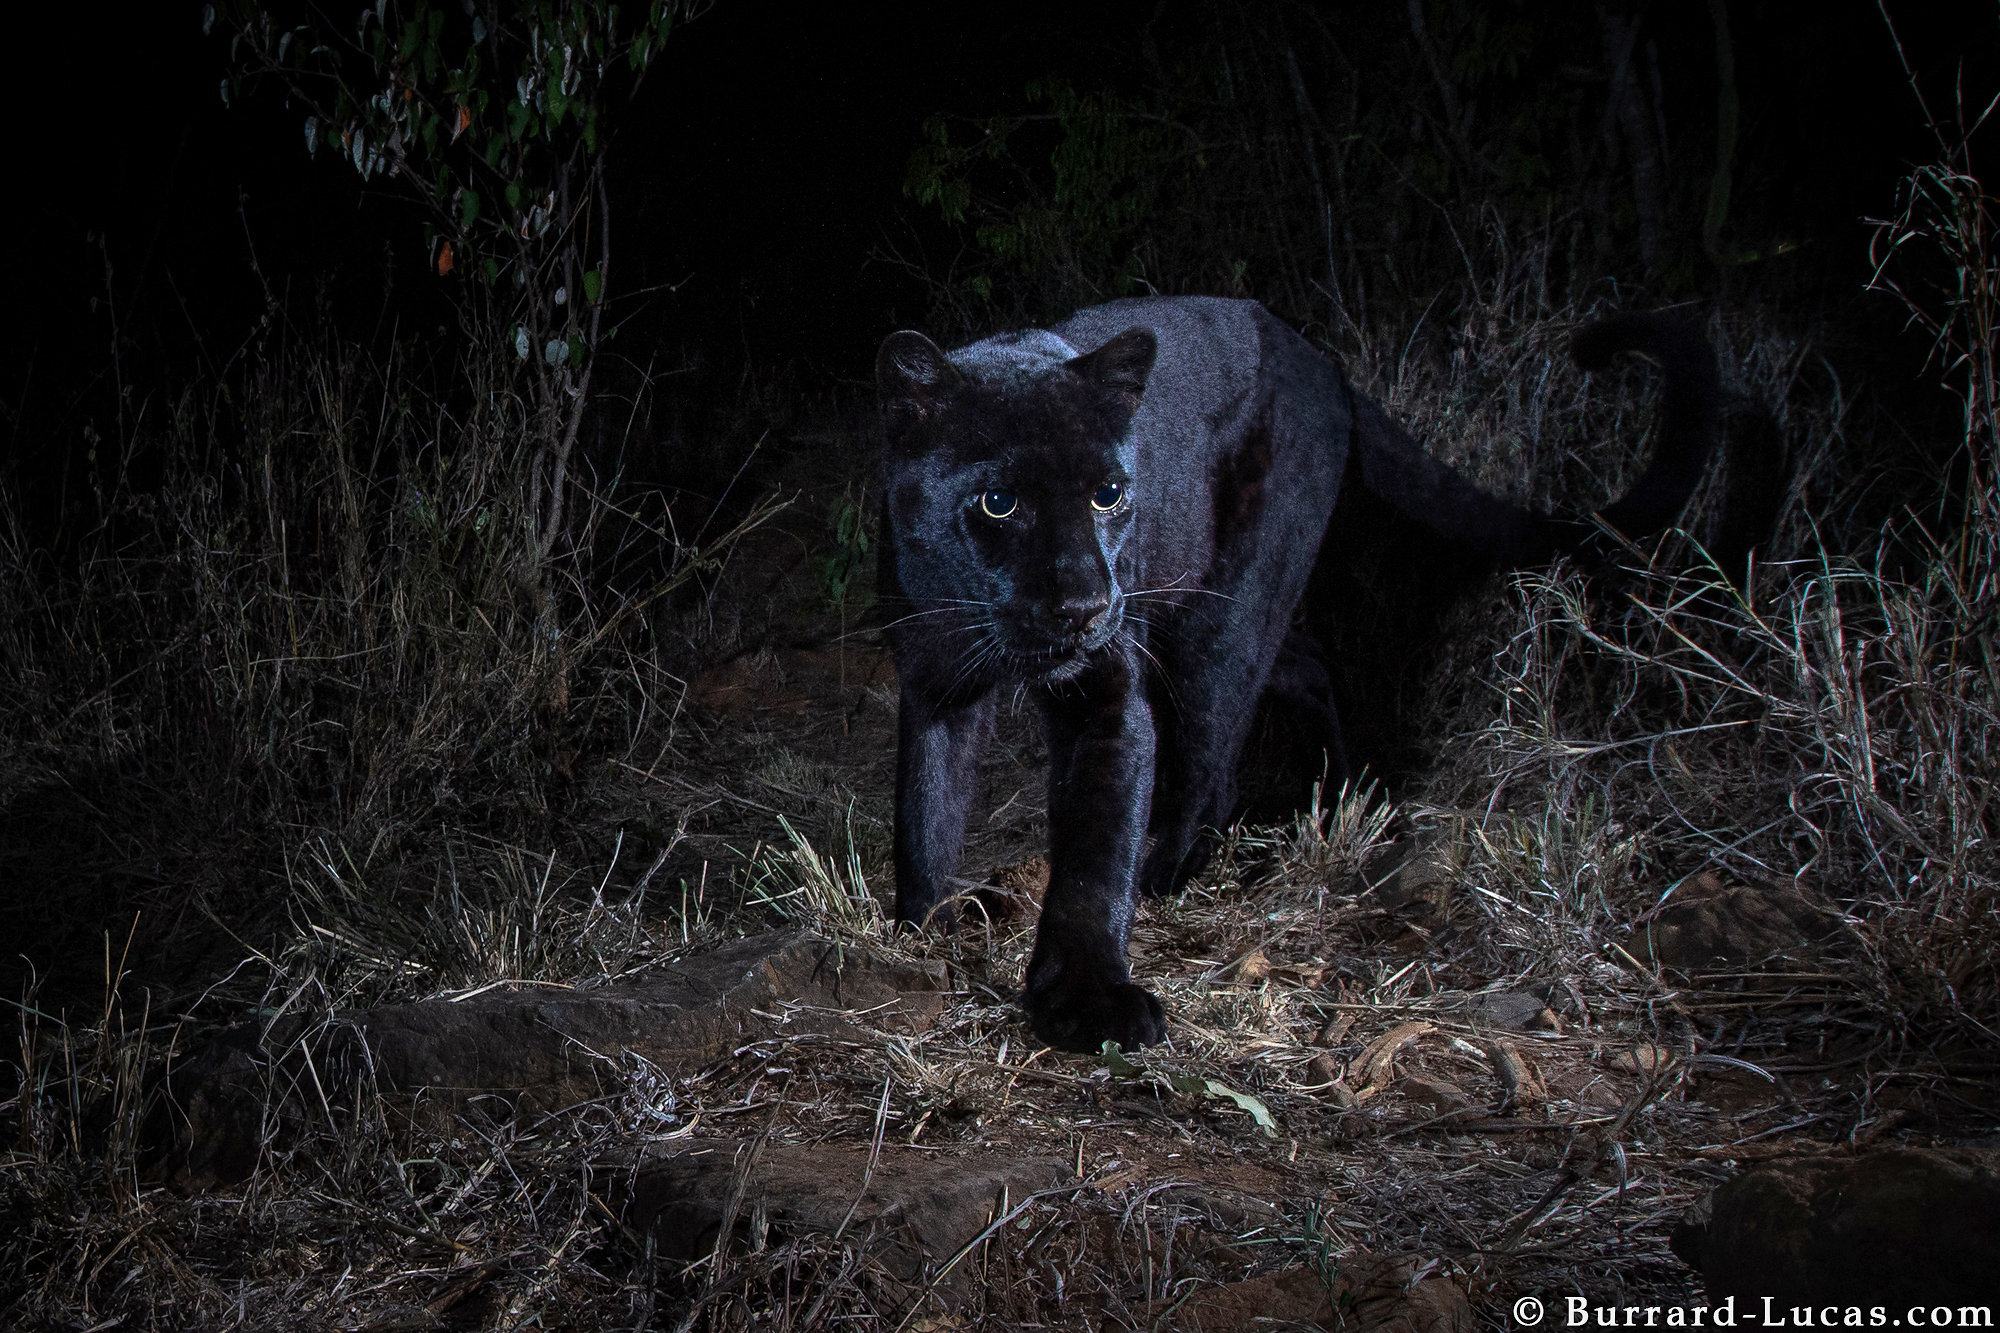 PHOTO: Photographer Will Burrard-Lucas captured images of a rare black leopard with a Camtraptions camera trap at the Laikipia Wilderness Camp in Kenya.